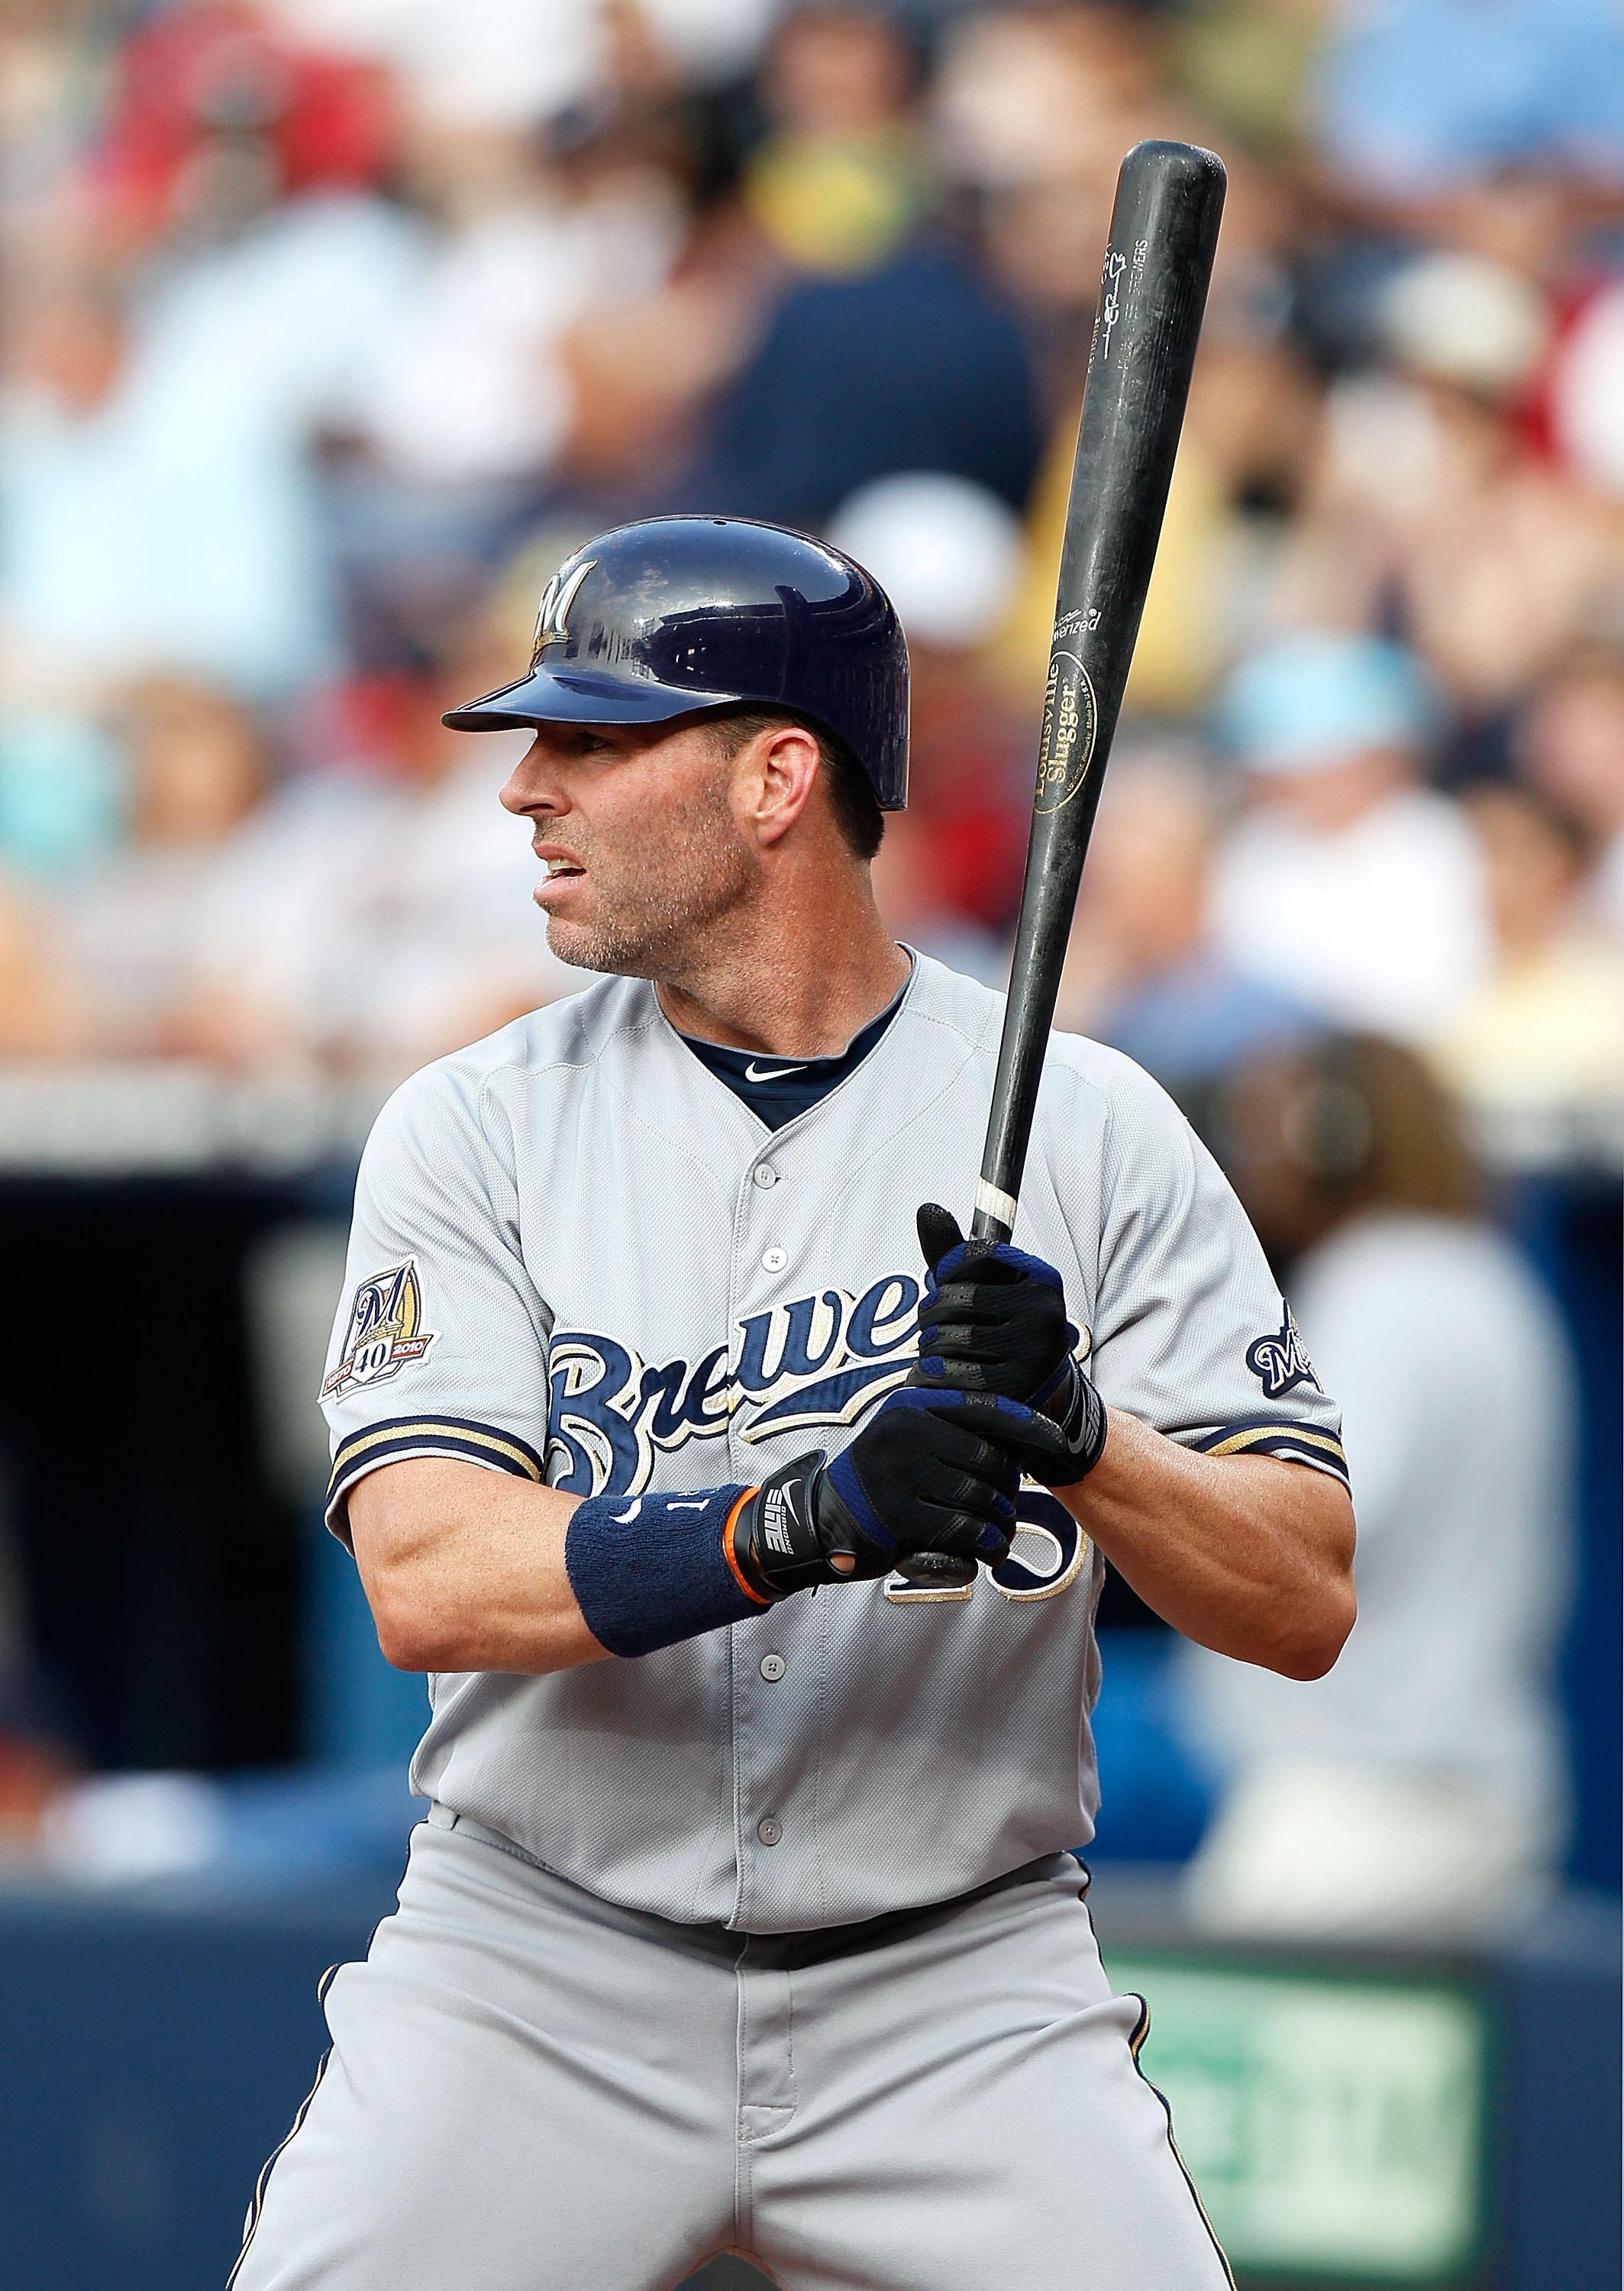 Jim Edmonds and the Top 10 Old Guys That Could Spell MLB Playoffs